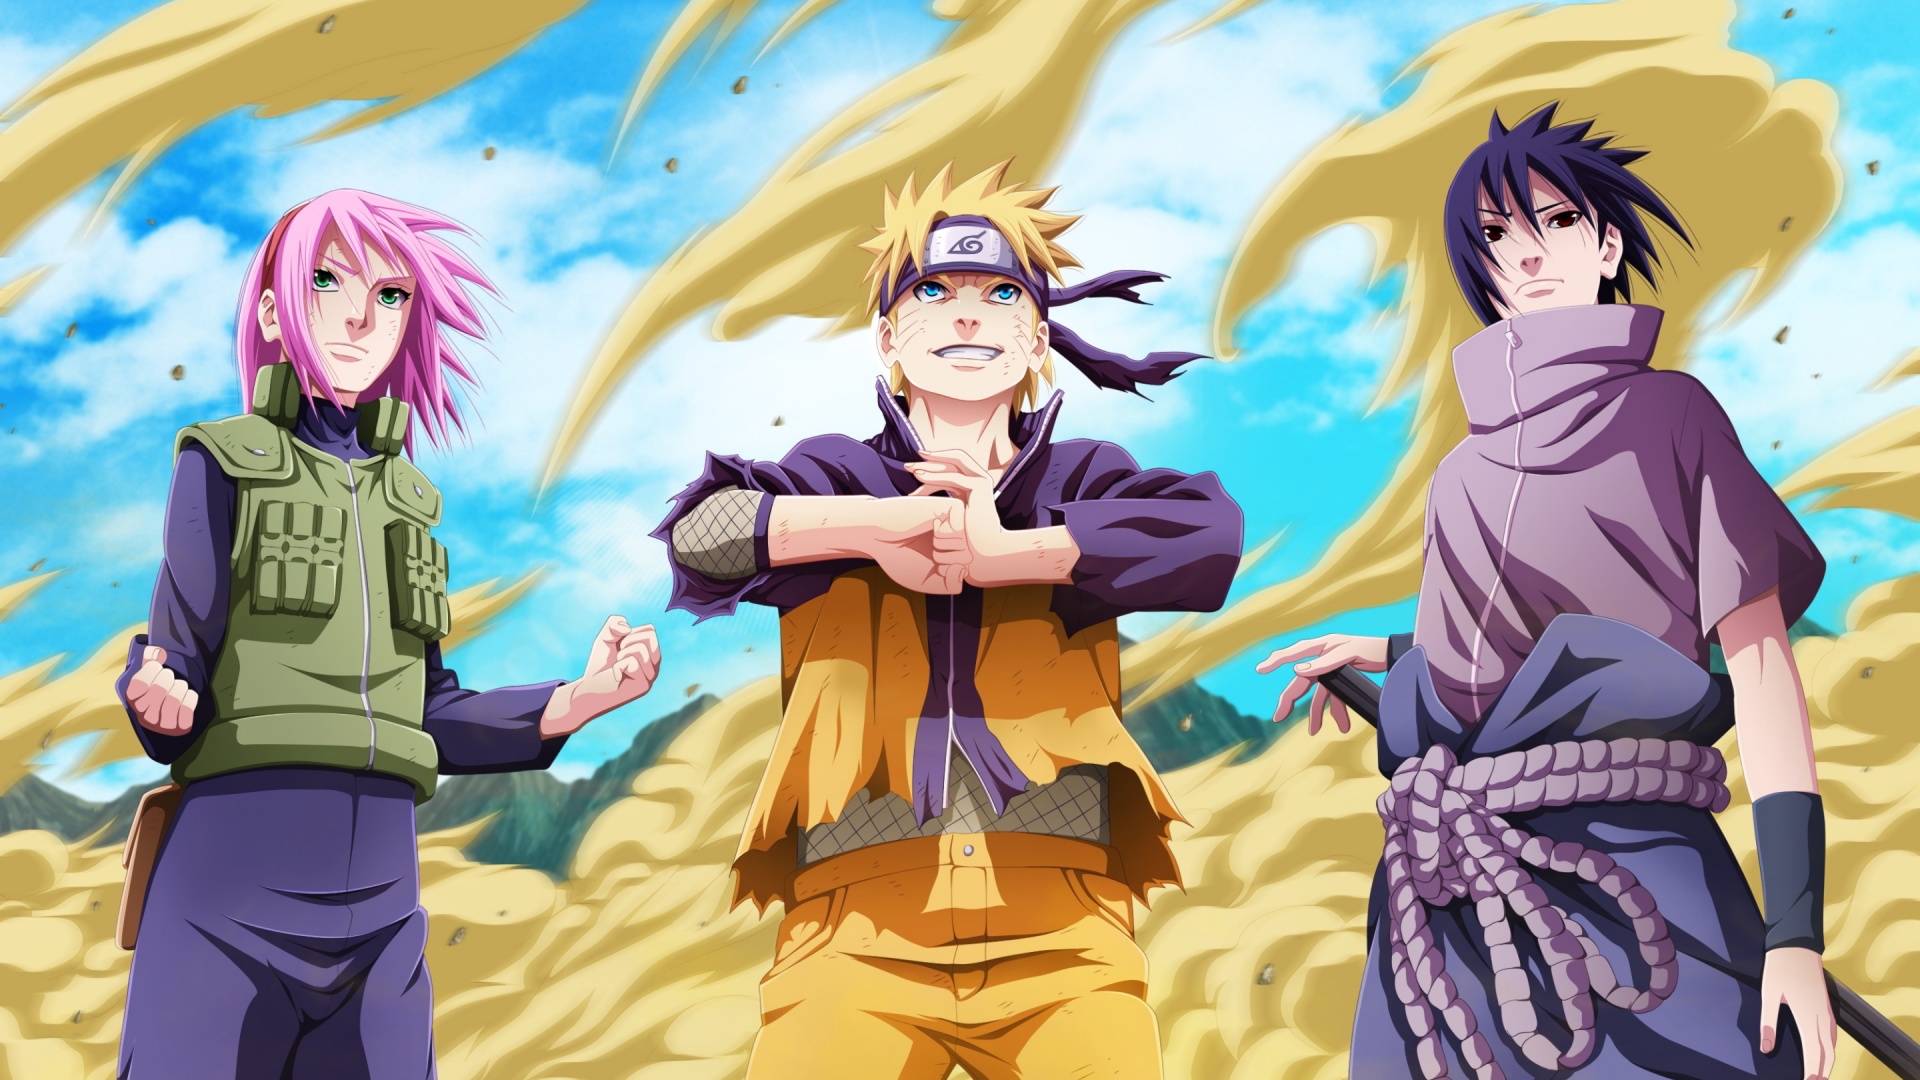 Naruto Wallpaper Hd 1920x1080 Images amp Pictures   Becuo